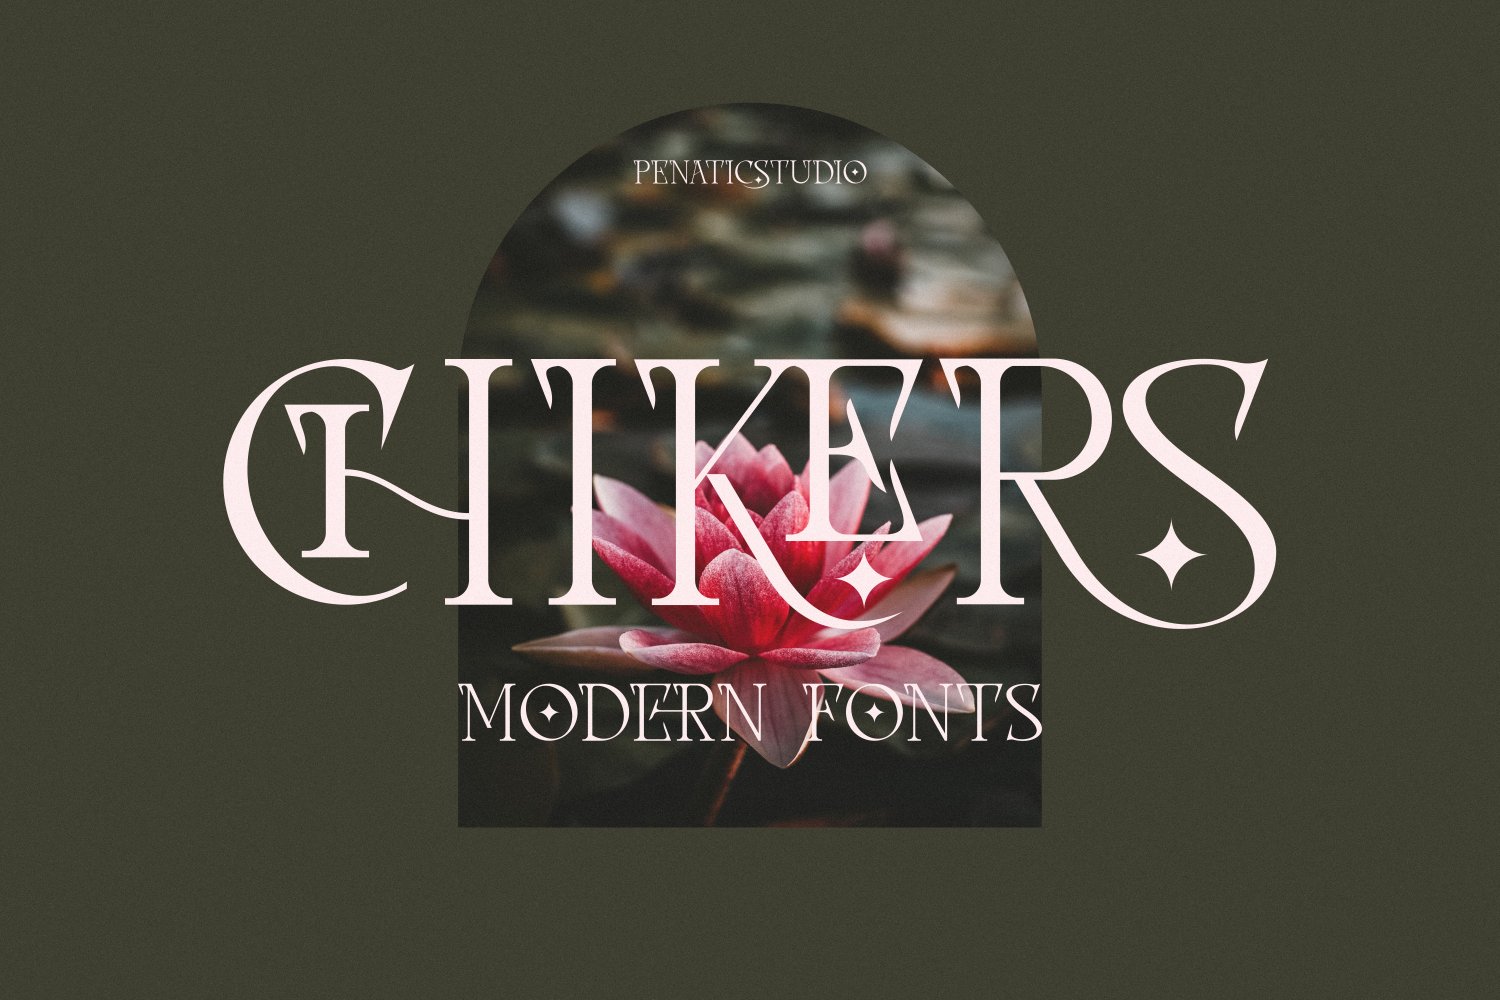 chikers _ modern fonts cover image.